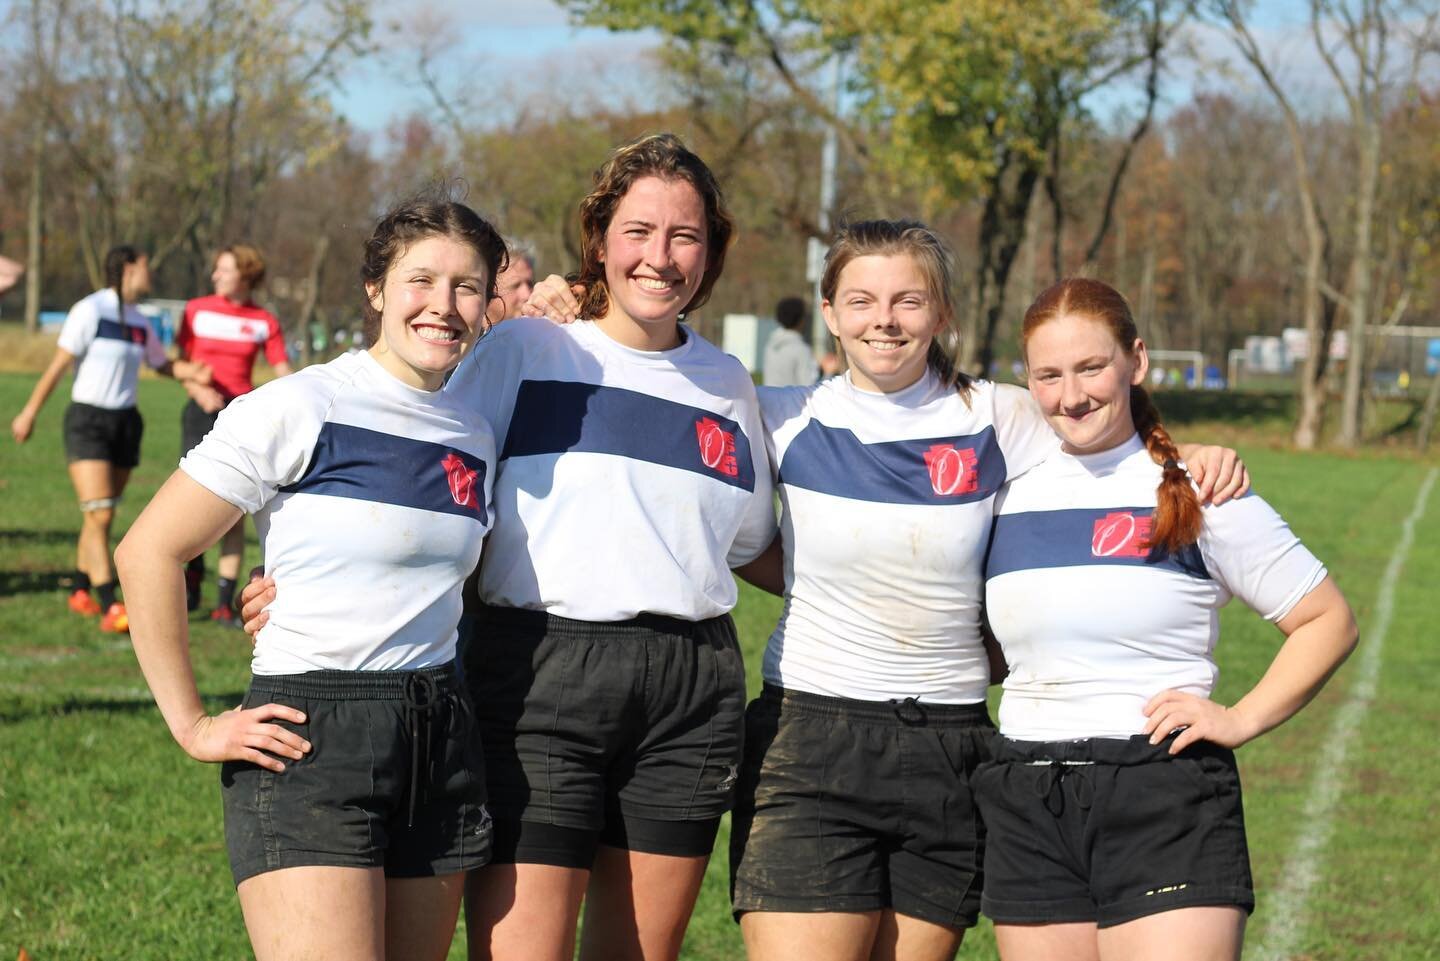 Oh, East? I thought you said Weast!! Congrats to Corn, Mish, Maddy, Grace, Coach Angela, and the rest of Team East for pulling off a big 88-7 win in yesterdays @eastpennrugby matchup. Two cheers for Maddy for for being named the East team&rsquo;s Pla